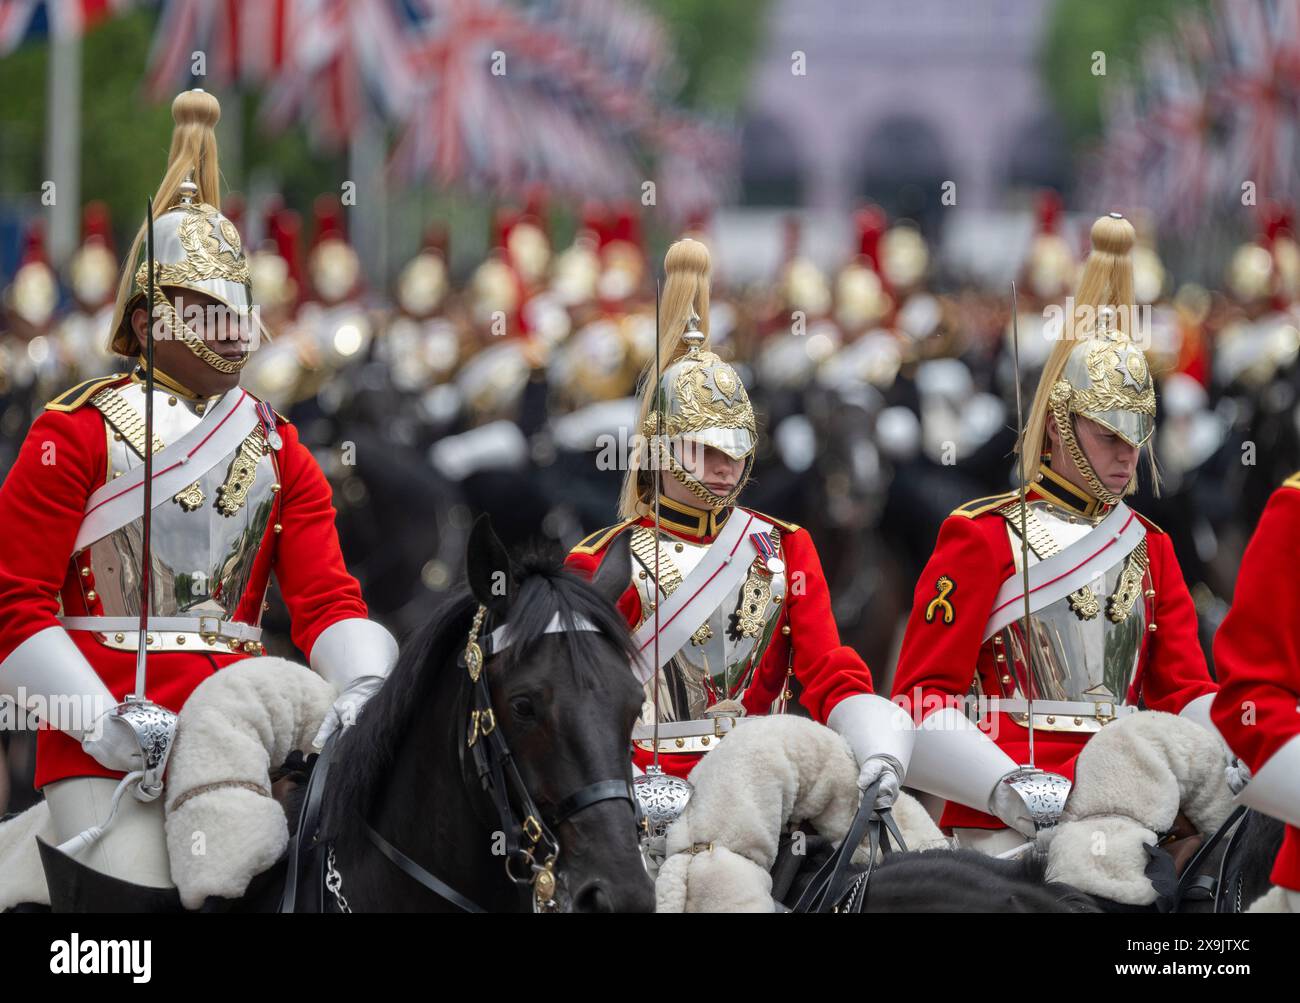 Queen Victoria Memorial, London, UK. 1st June, 2024. The Major General’s Review of the Trooping of the Colour for the King’s Birthday Parade takes place. This rehearsal is the first of two formal reviews in full dress uniform of the troops and horses before parading for HM The King’s Official Birthday Parade on the 15th June. The soldiers are inspected by Major General James Bowder OBE, The Major General Commanding the Household Division. Photograph of the event from the Queen Victoria Memorial in front of Buckingham Palace. Credit: Malcolm Park/Alamy Live News Stock Photo